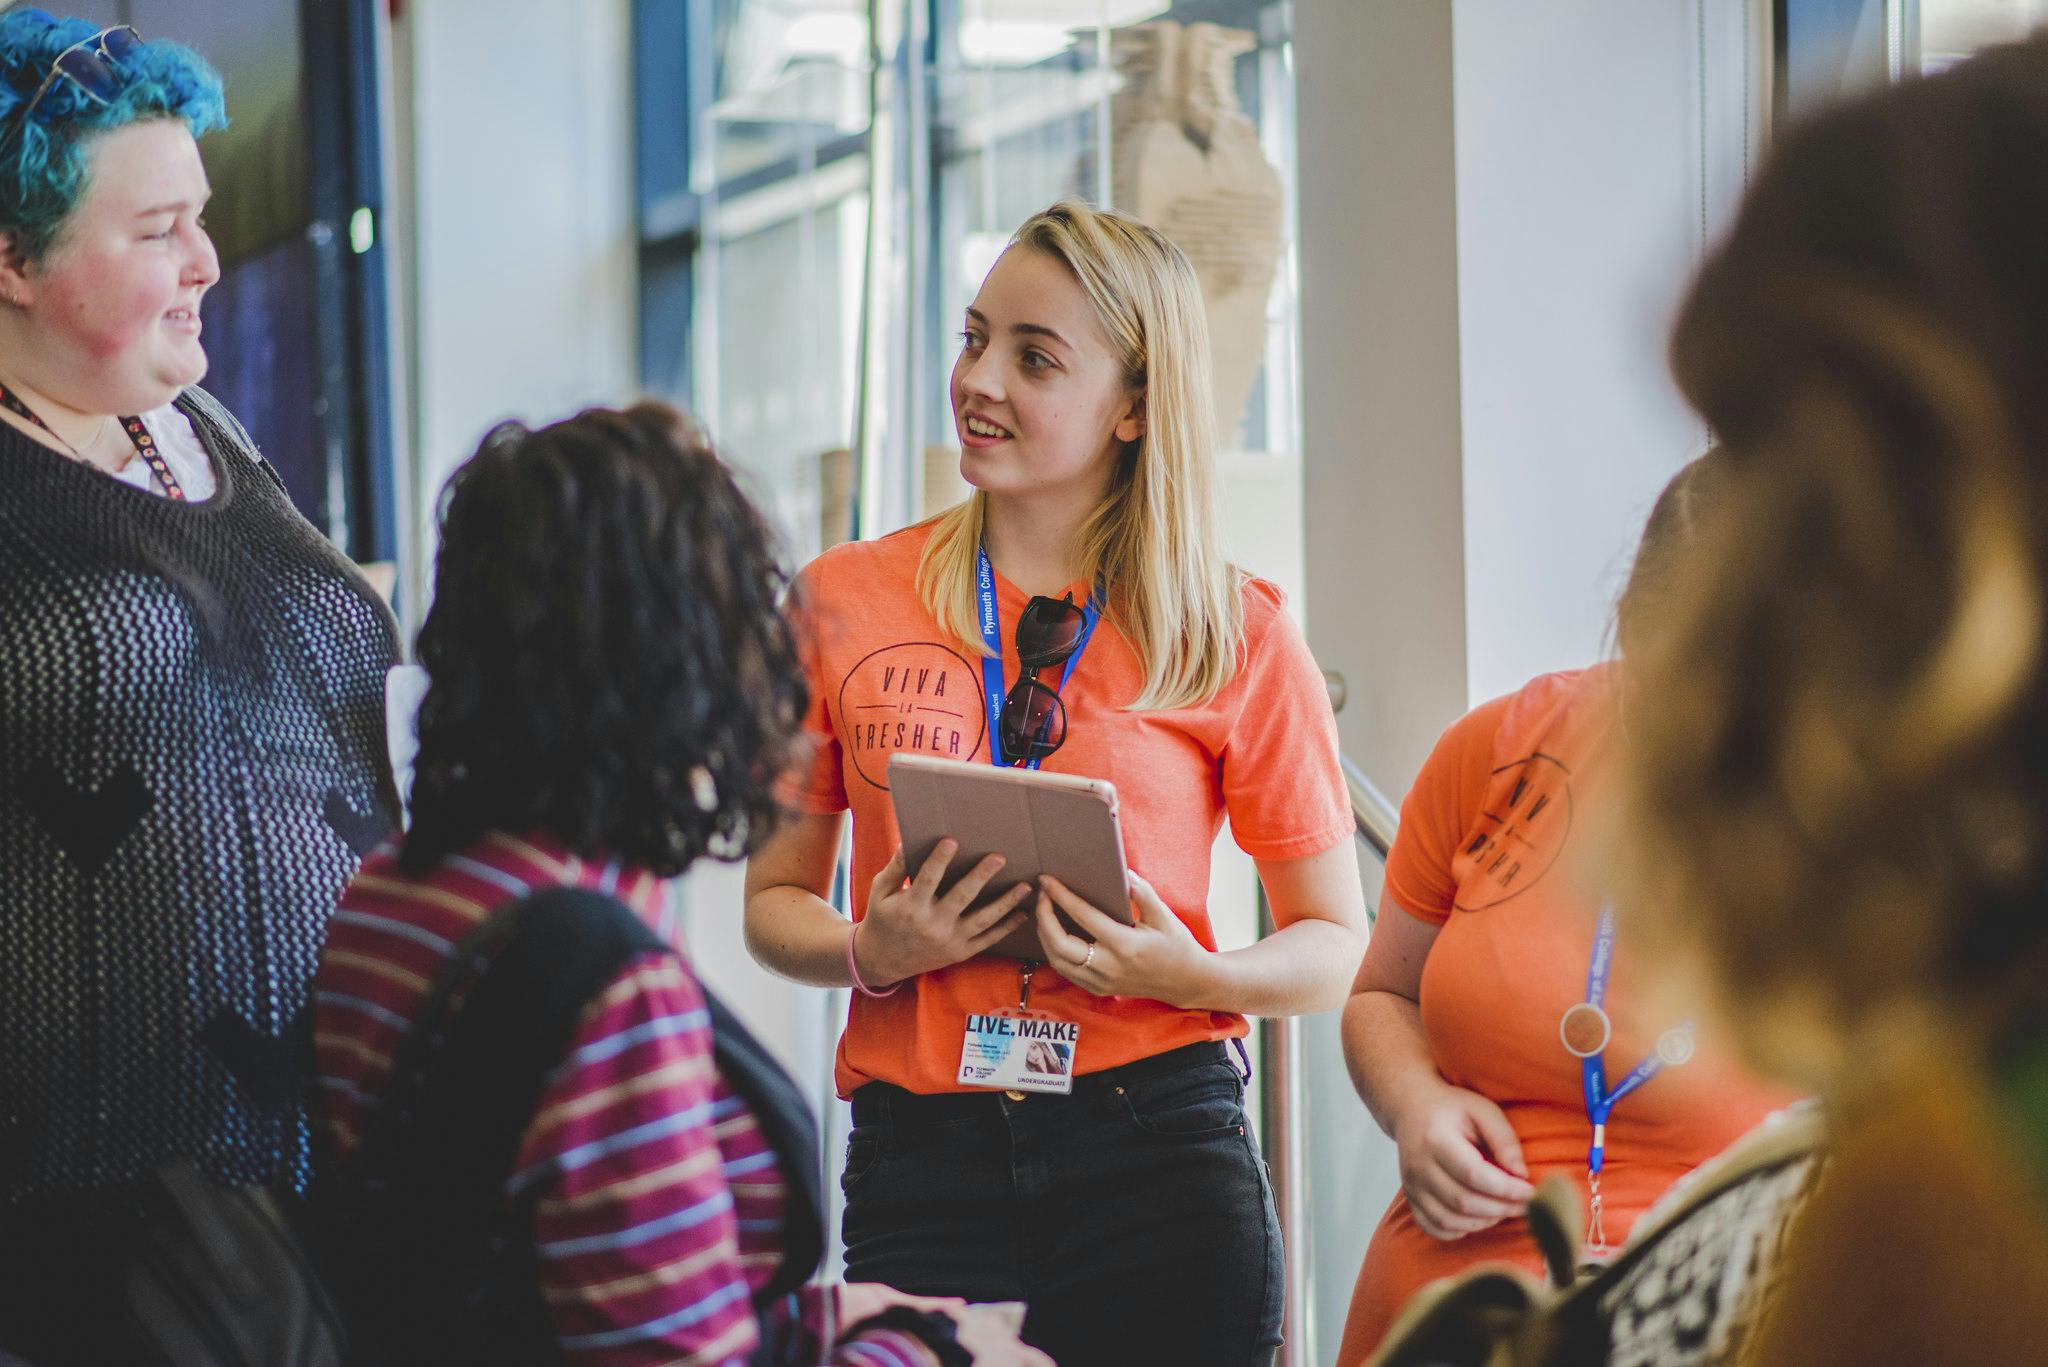 A blond haired student wears and bright orange Students' Union tshirt and talks to a group of four people at the annual Freshers Event